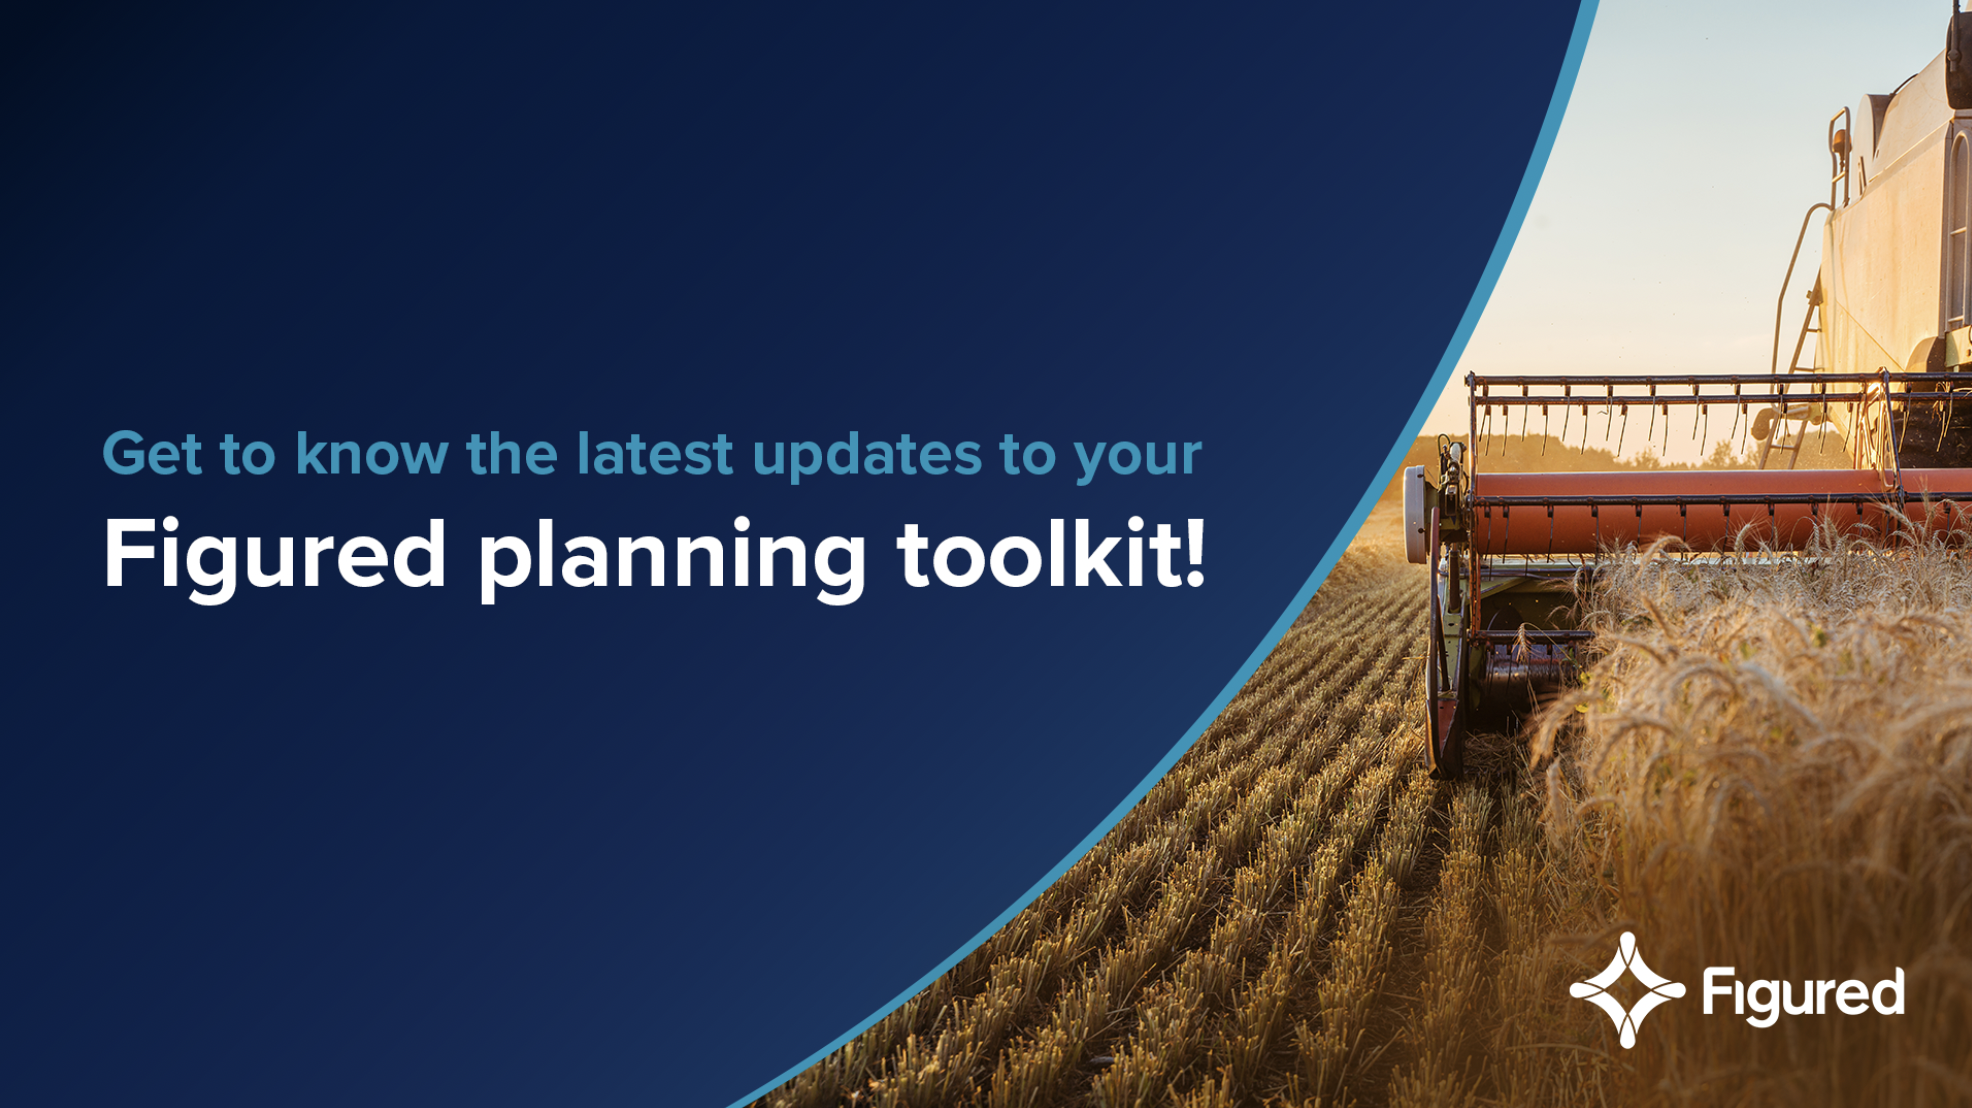 Get to know the latest updates to Figured's planning tools!